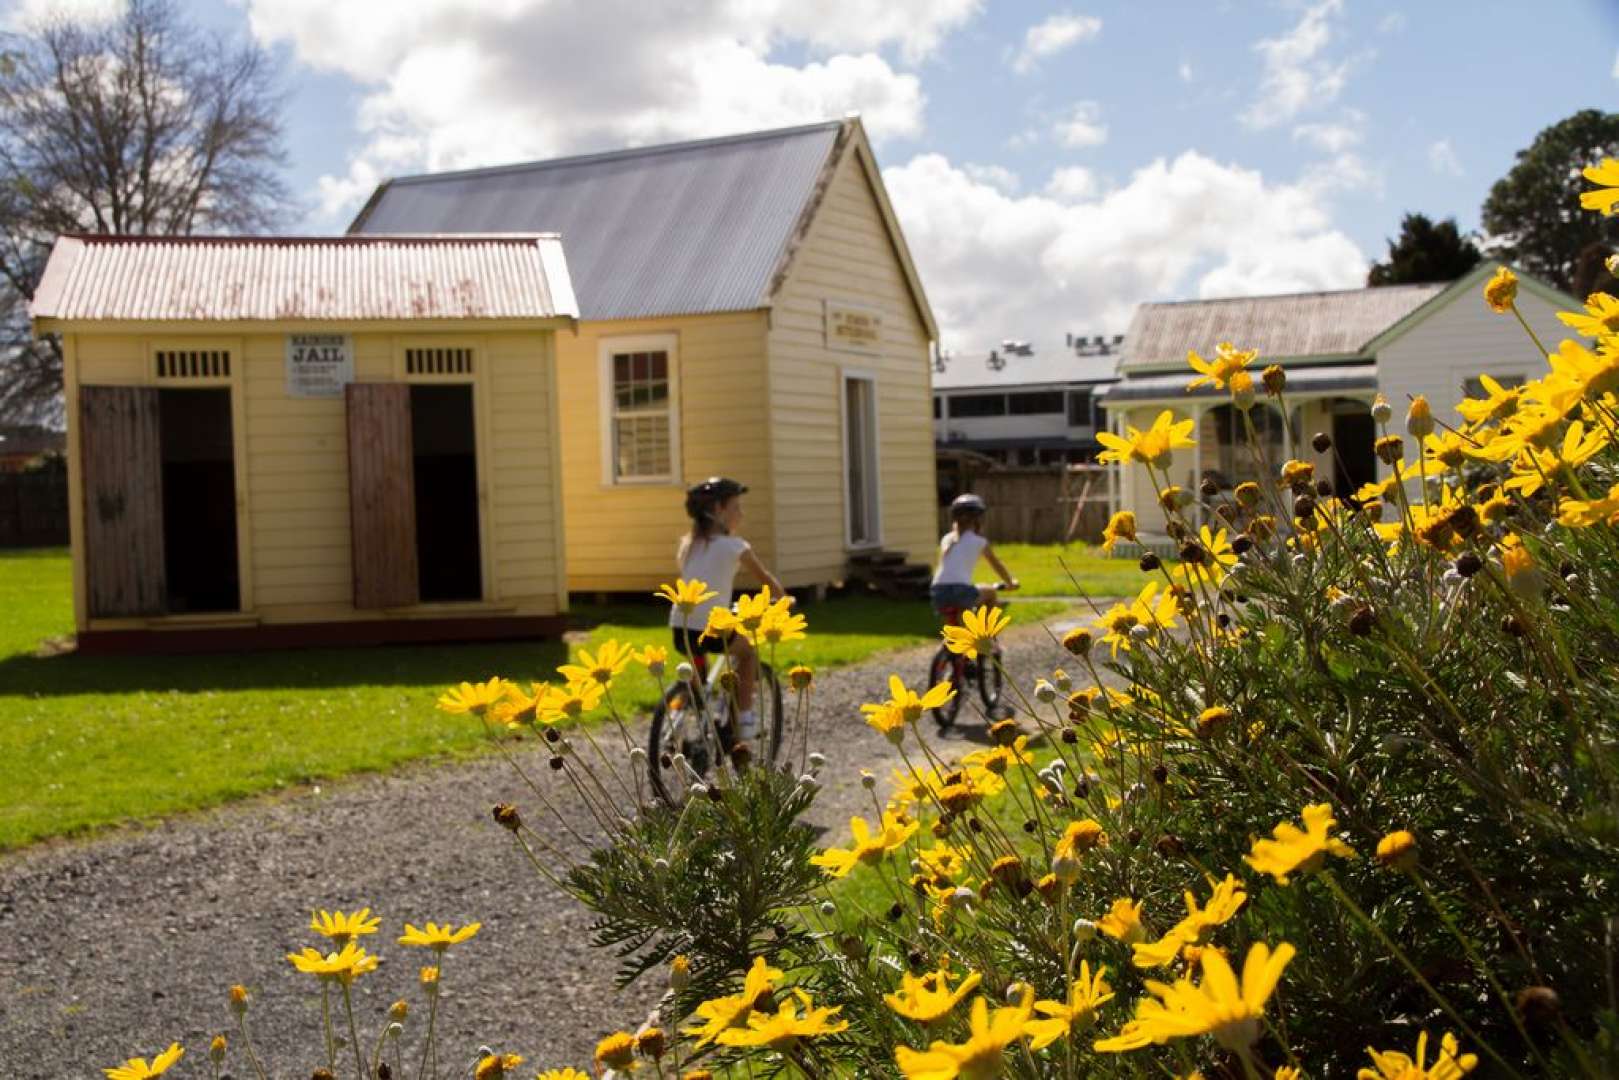 Take a journey into the Past at Pioneer Village in Kaikohe Northland